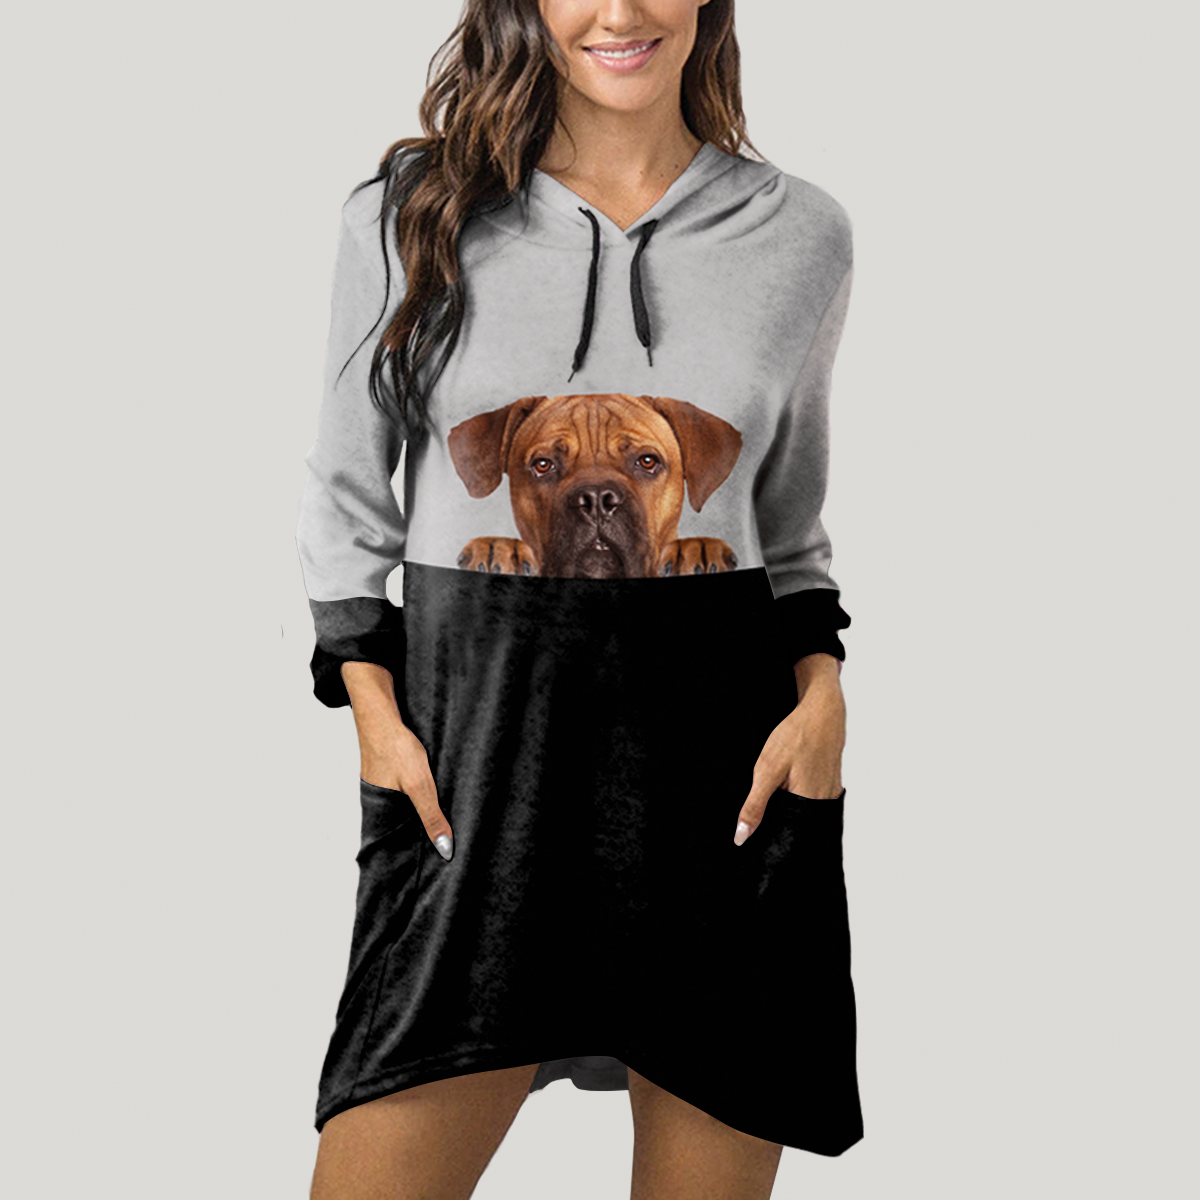 Can You See Me Now - Cane Corso Hoodie mit Ohren V1